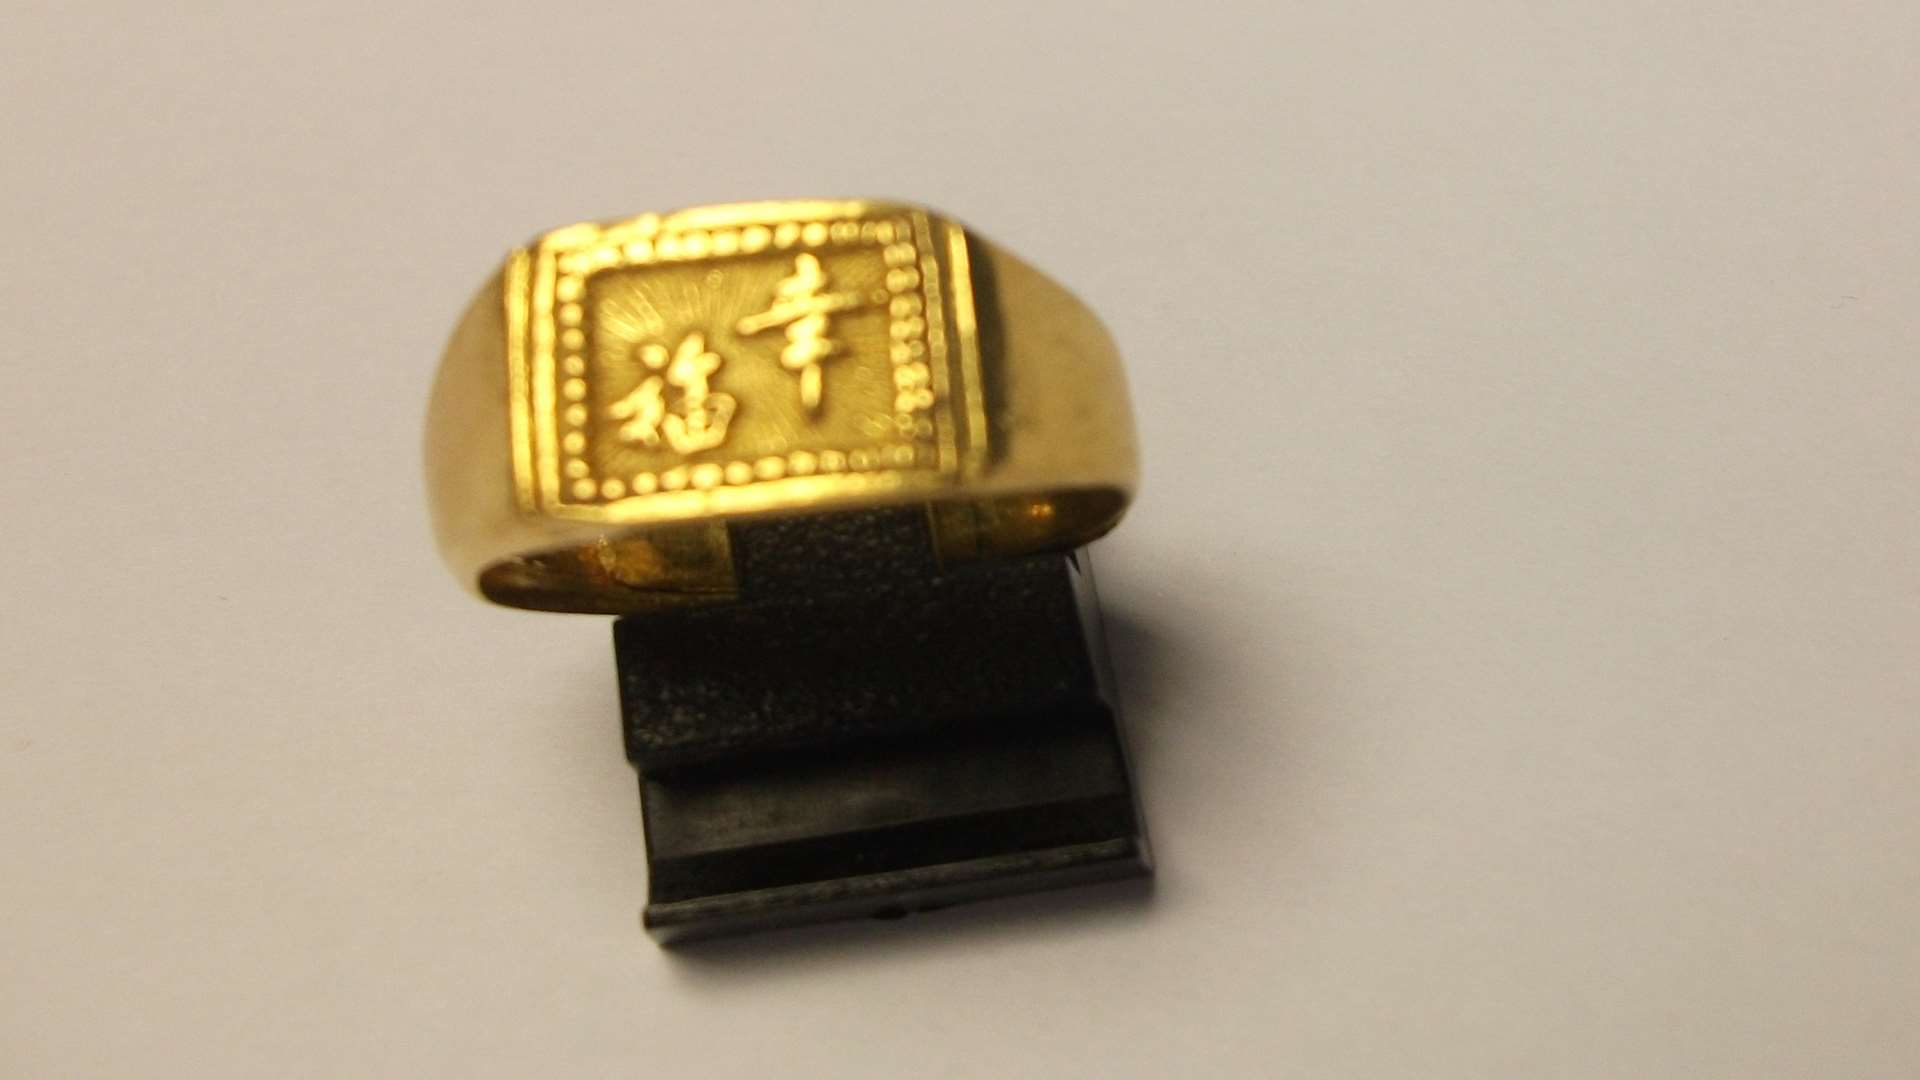 Do you recognise this ring?